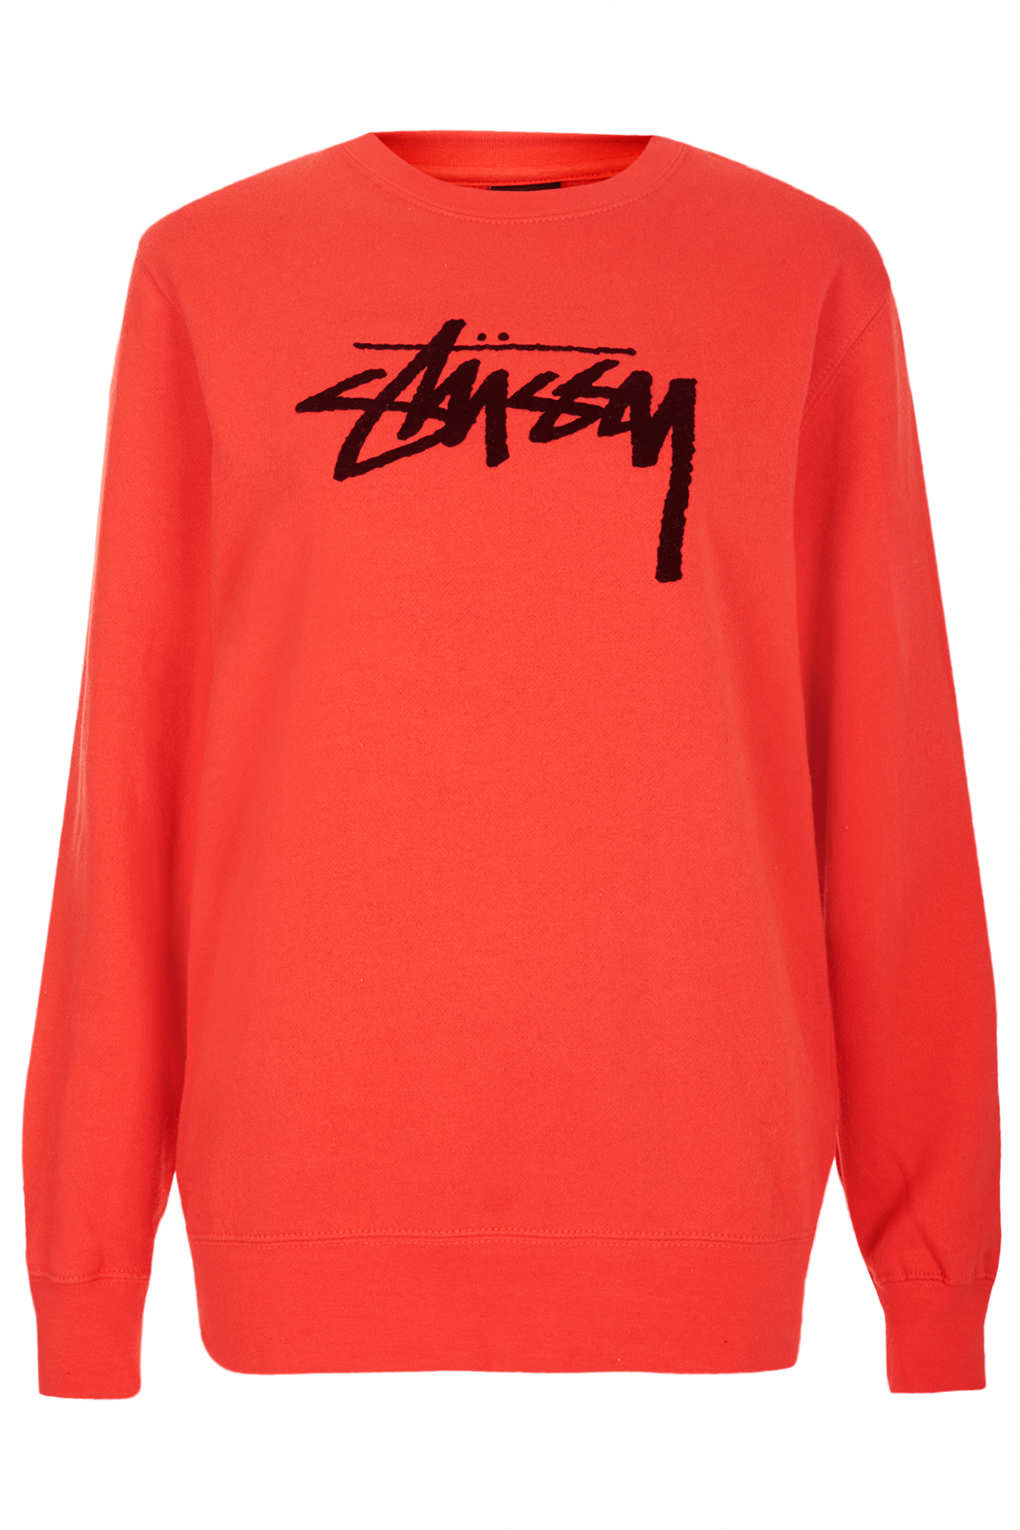 Topshop Logo Sweat By Stussy in Red | Lyst